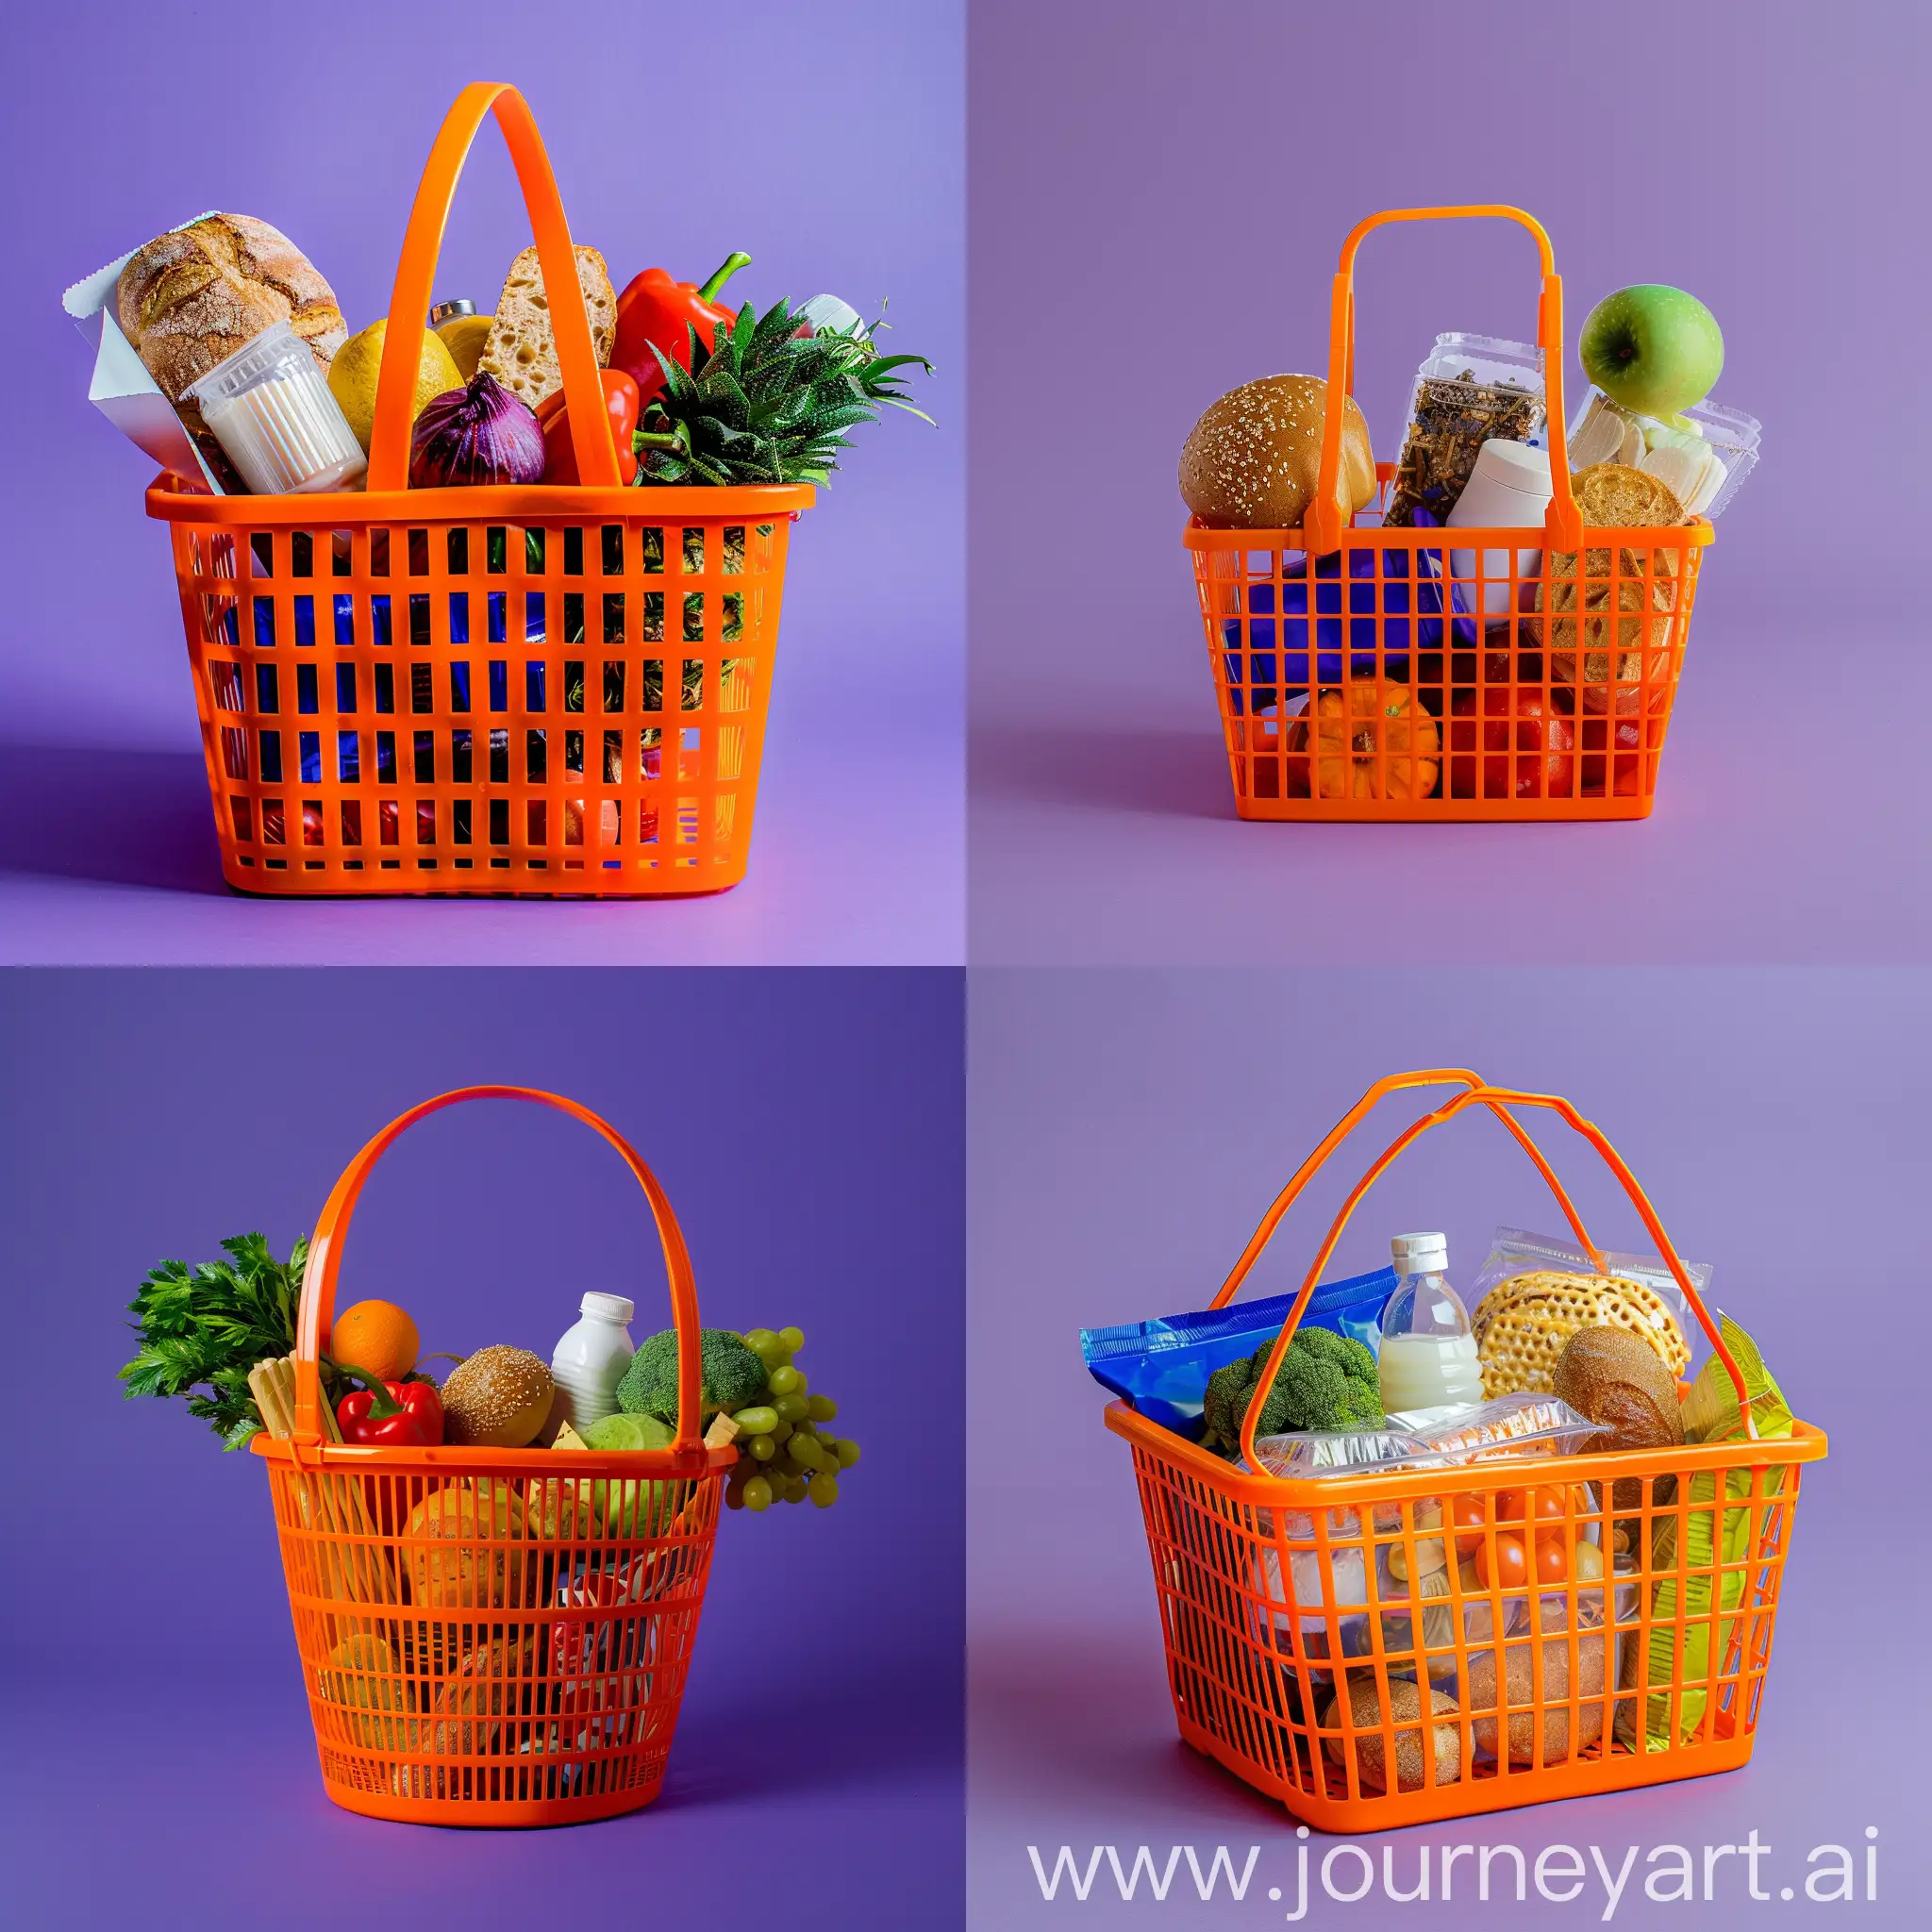 Colorful-Shopping-Basket-with-Food-Items-on-Purple-Background